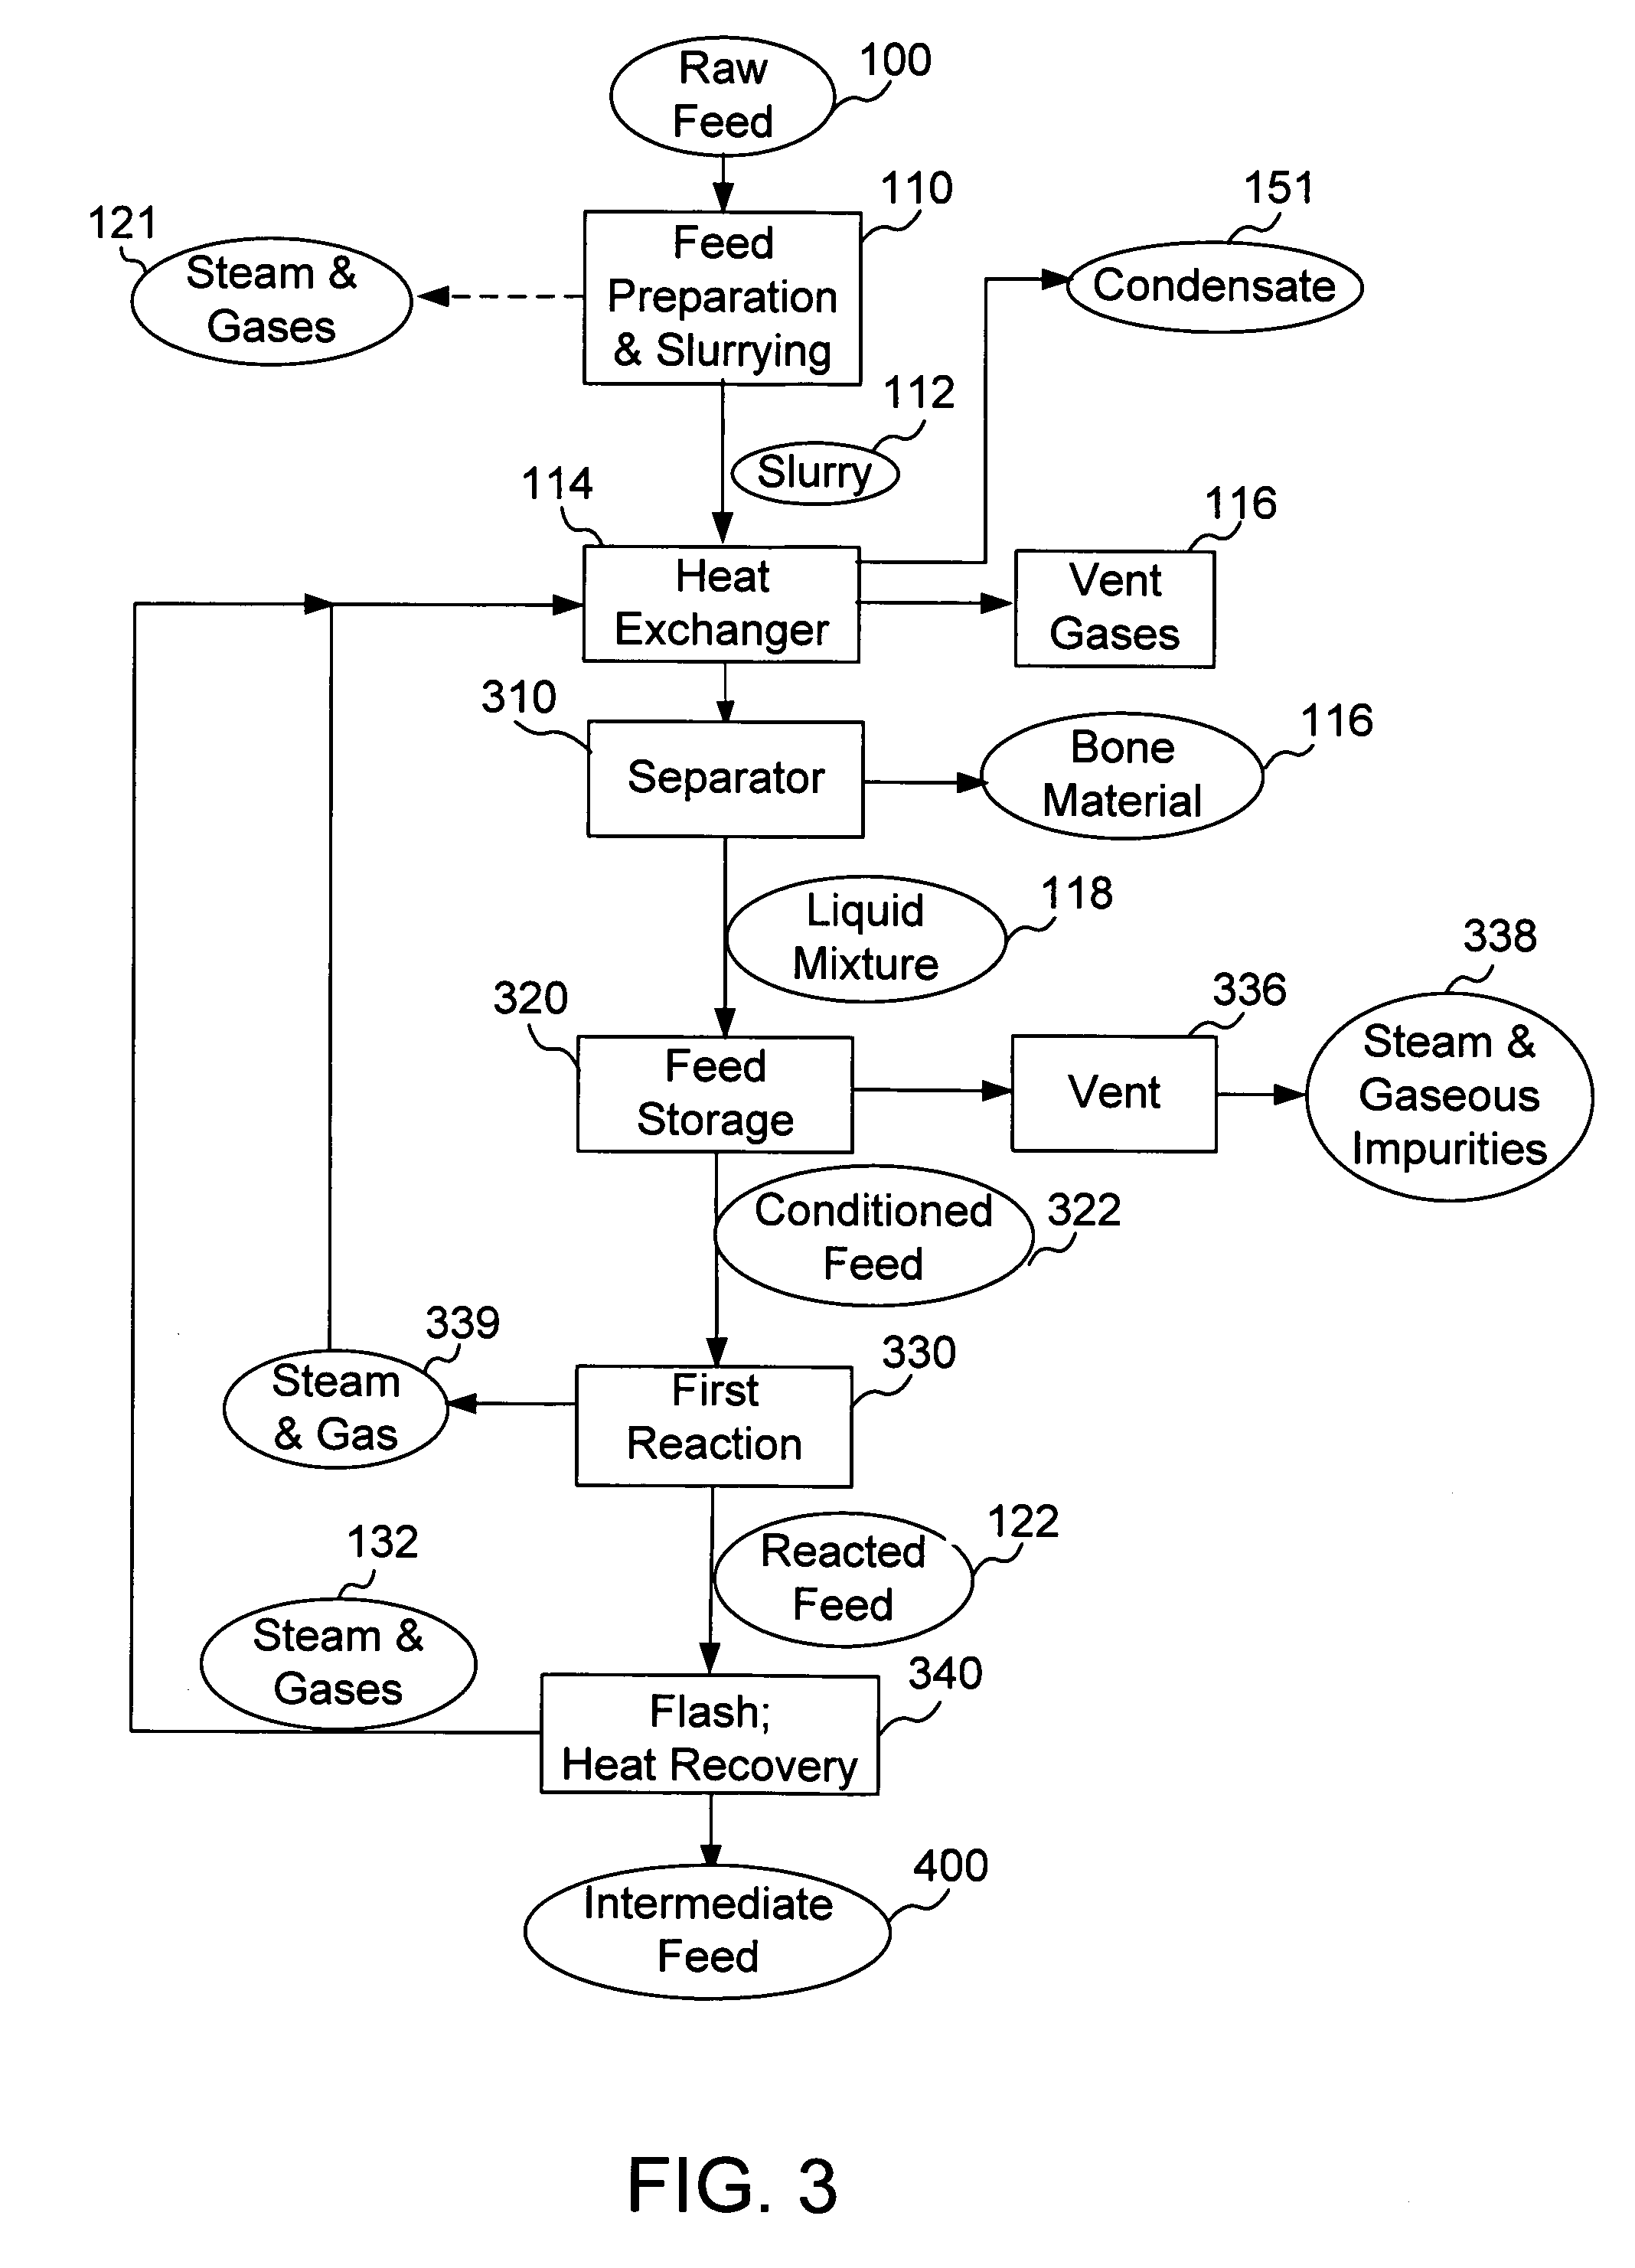 Apparatus and process for separation of organic materials from attached insoluble solids, and conversion into useful products